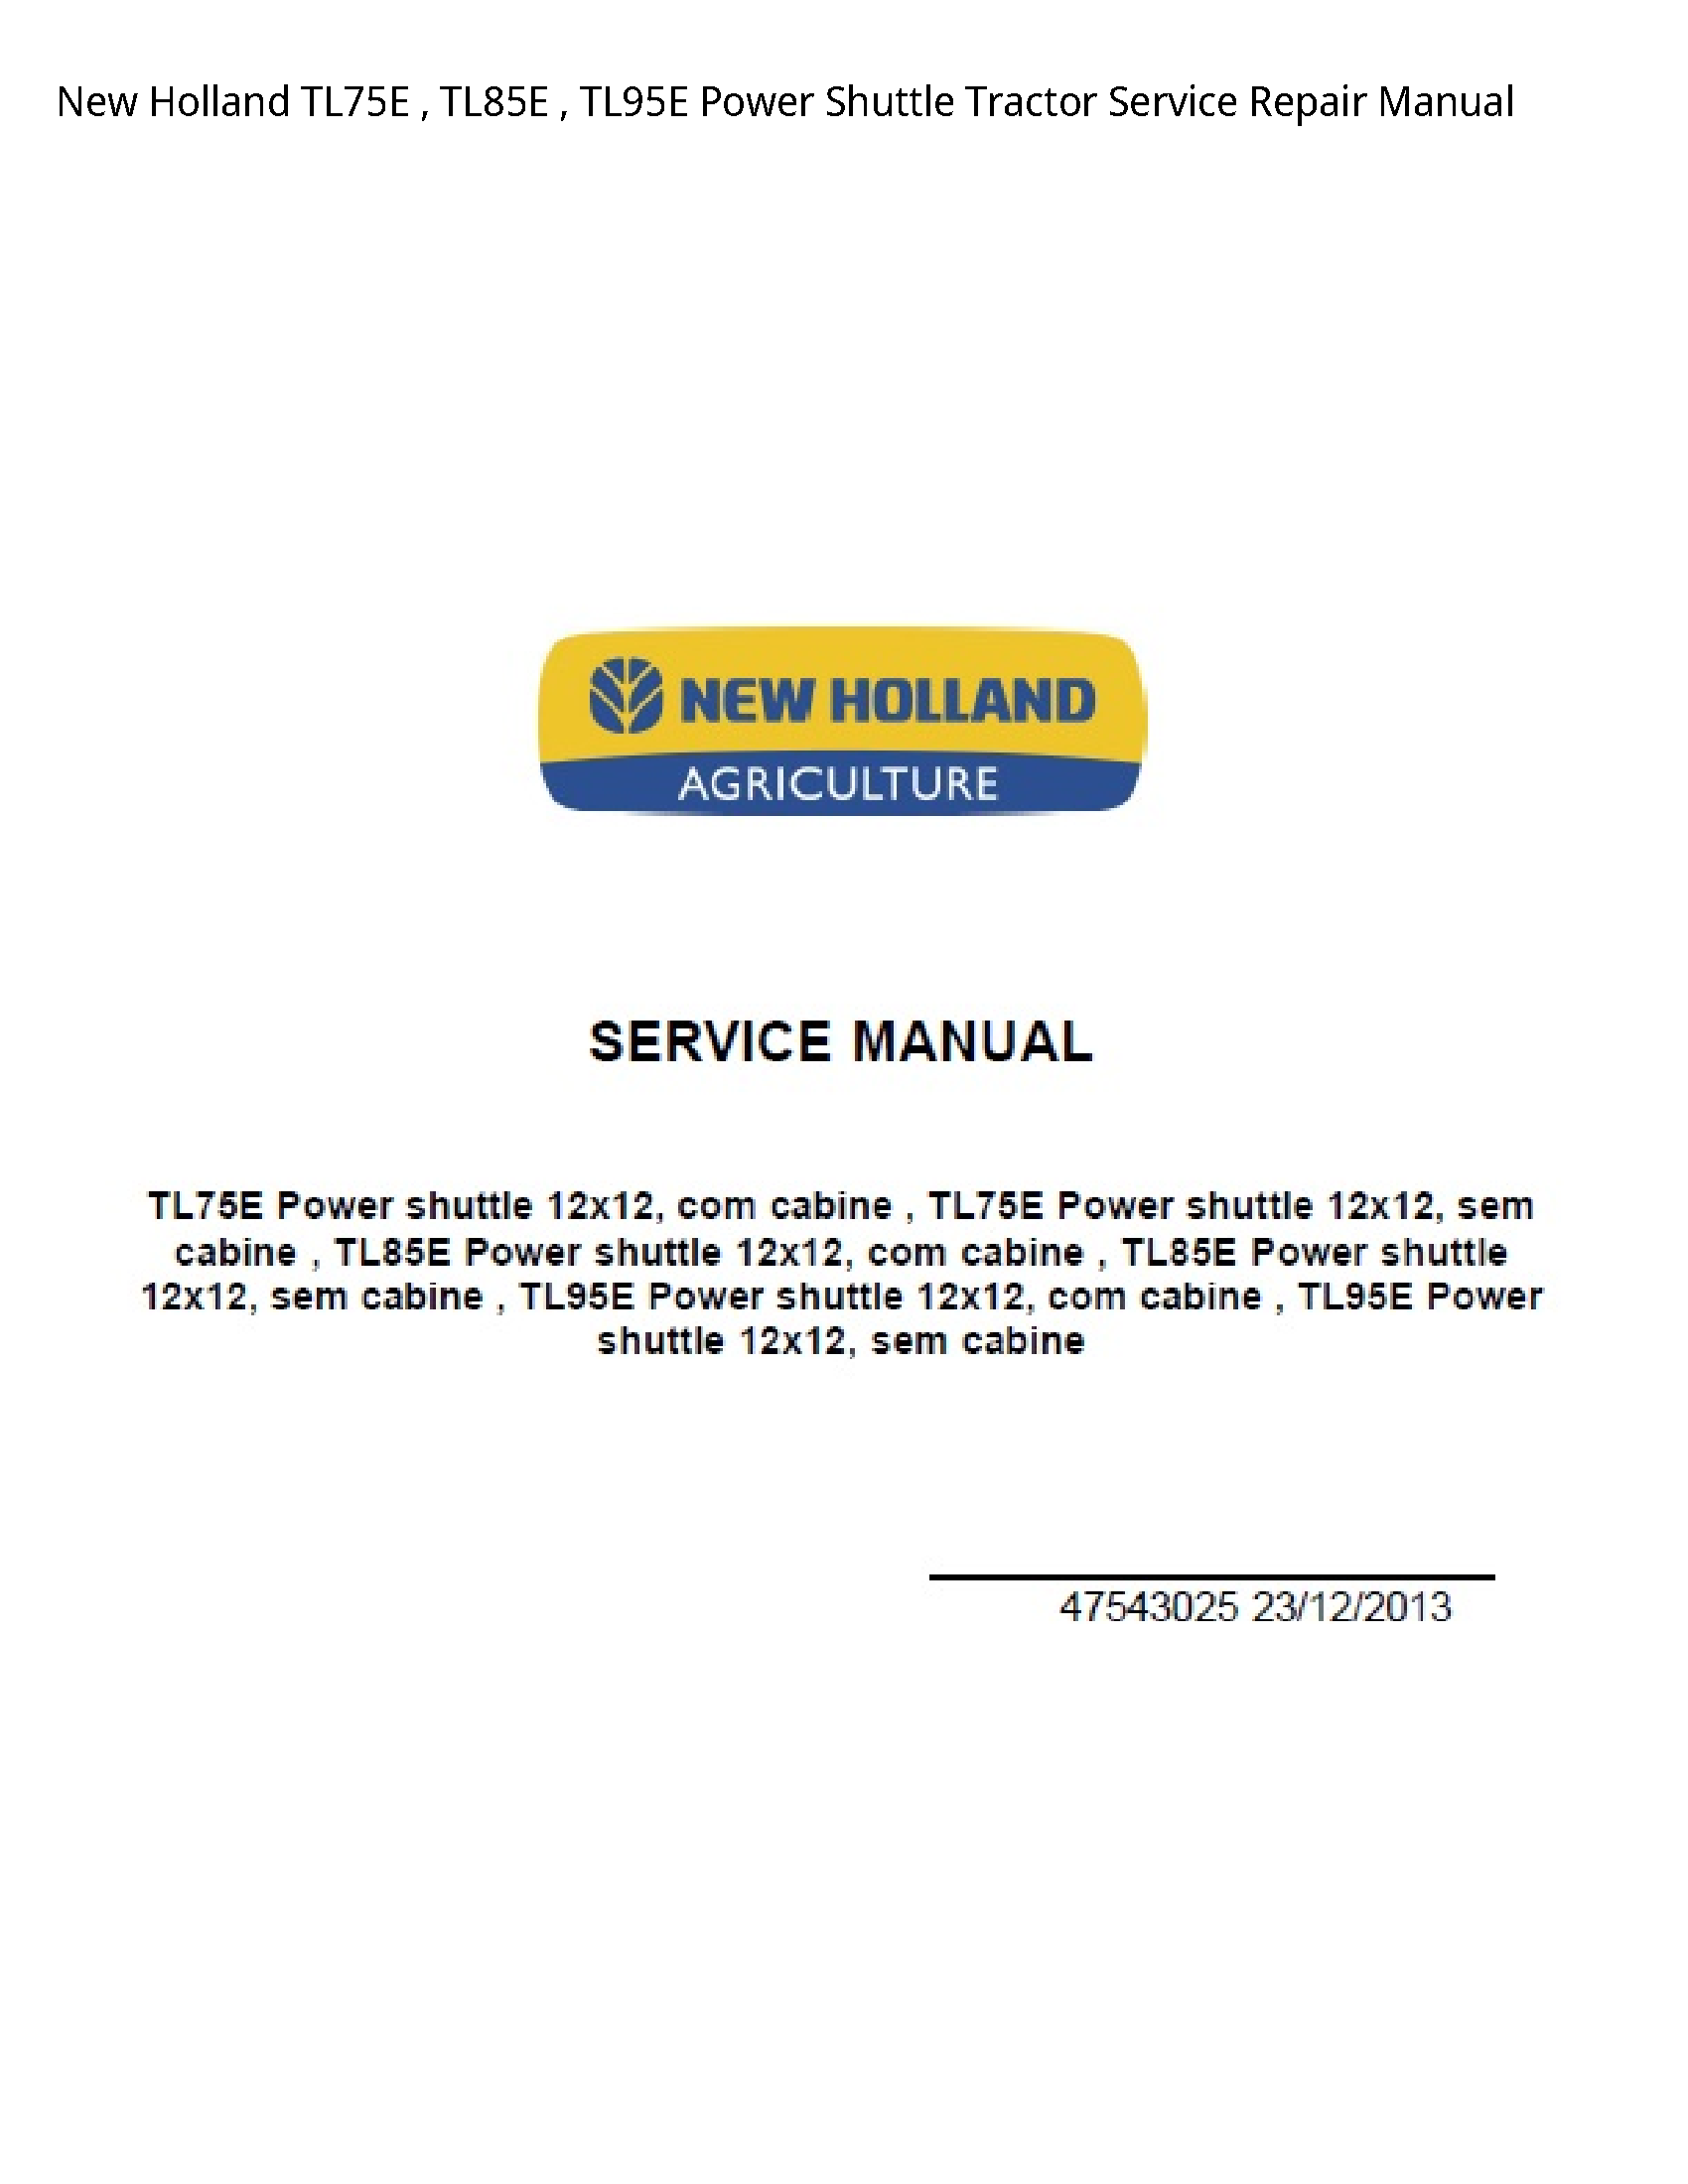 New Holland TL75E Power Shuttle Tractor manual